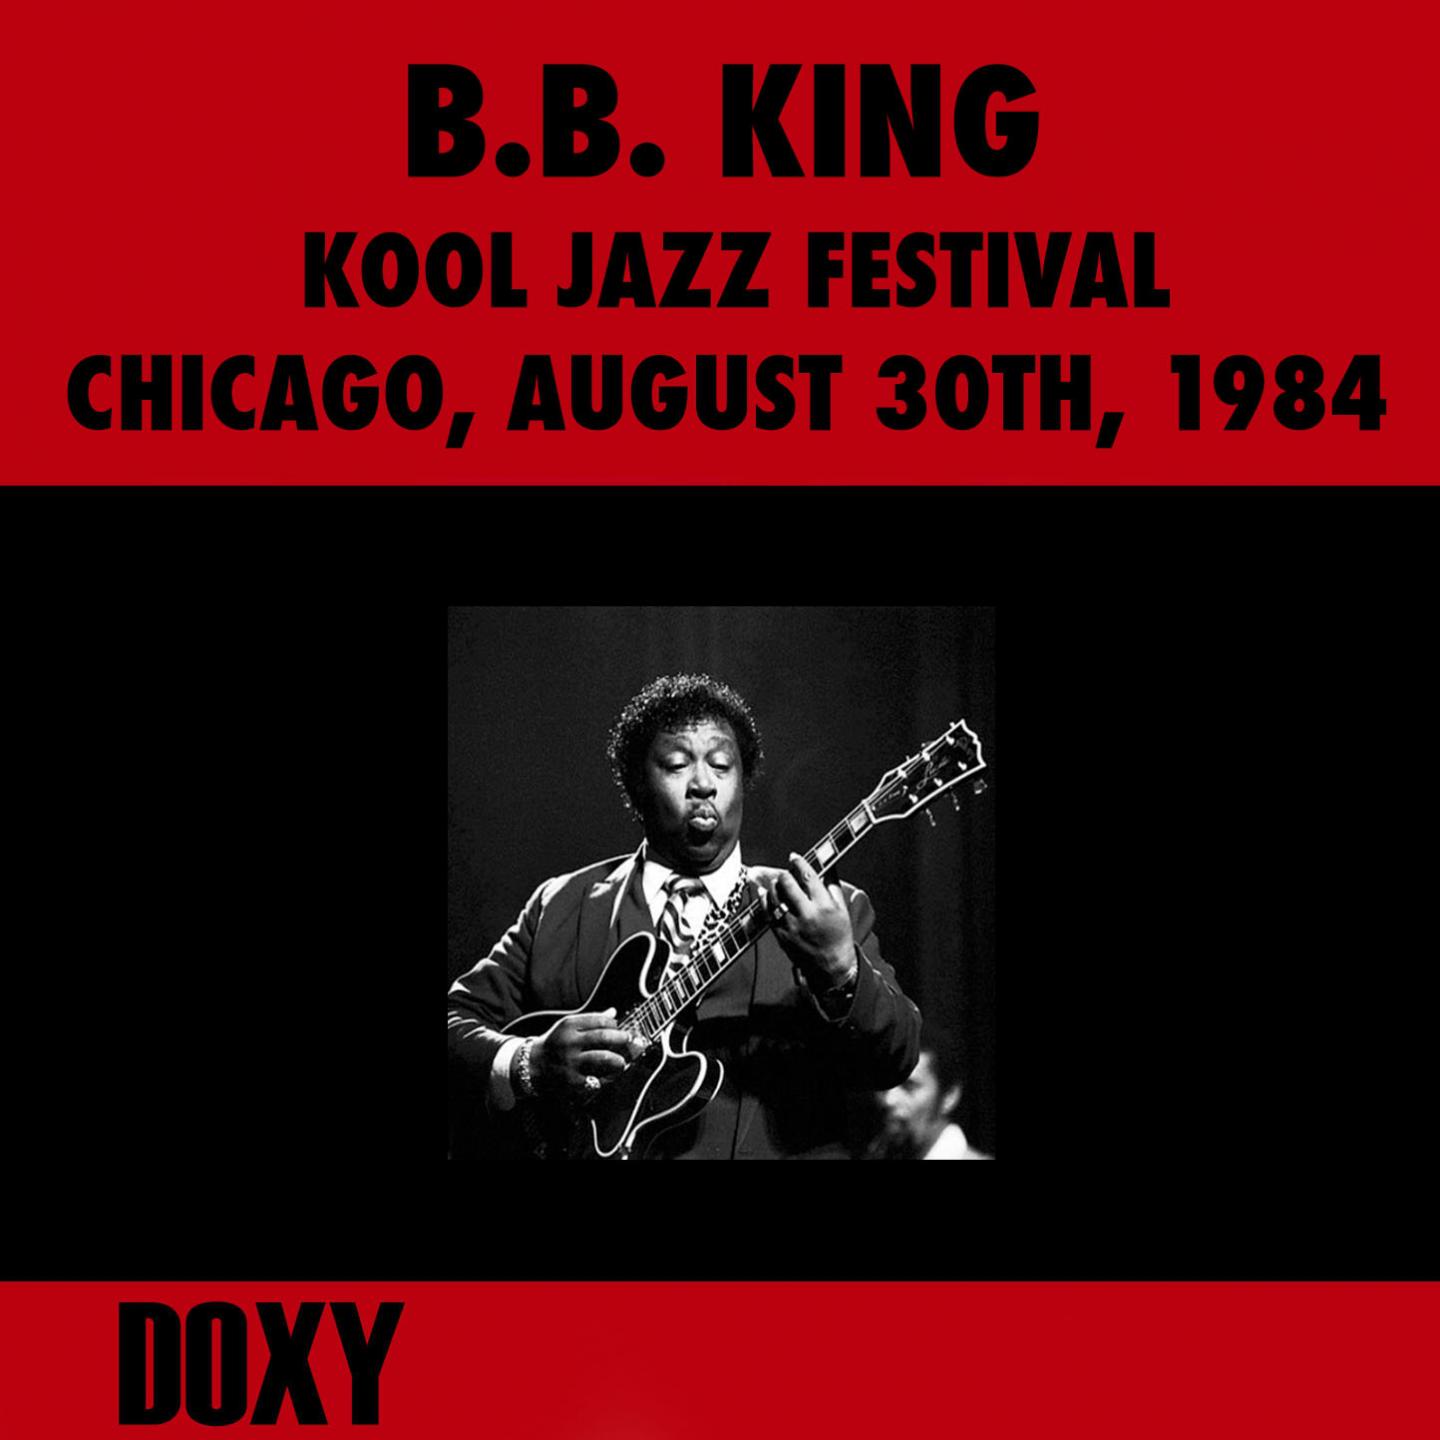 Kool Jazz Festival, Chicago, August 30th, 1984 (Doxy Collection, Remastered, Live on Wbez Fm Broadcasting)